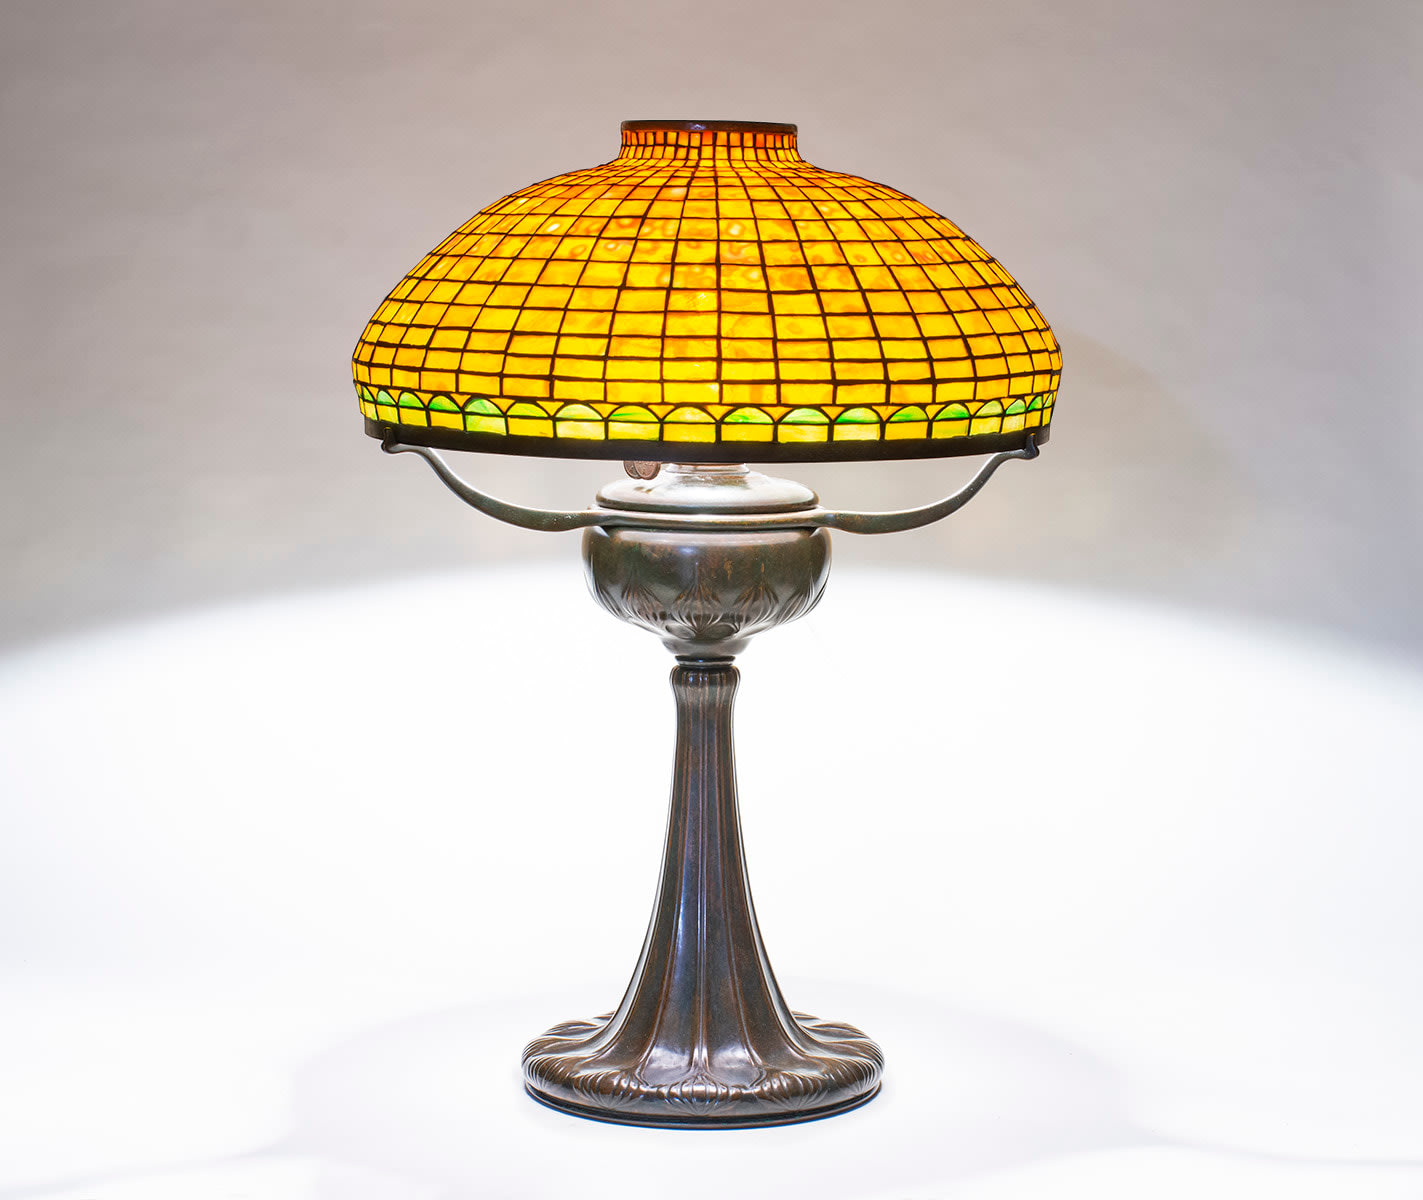 a geometric tiffany lamp dating from 1904, on a tyler bronze base in dark brown patina, with three thin bronze arms supporting a leaded glass shade formed by orange mottled tiffany glass in a grid, the lower border with semi-circular green glass border.